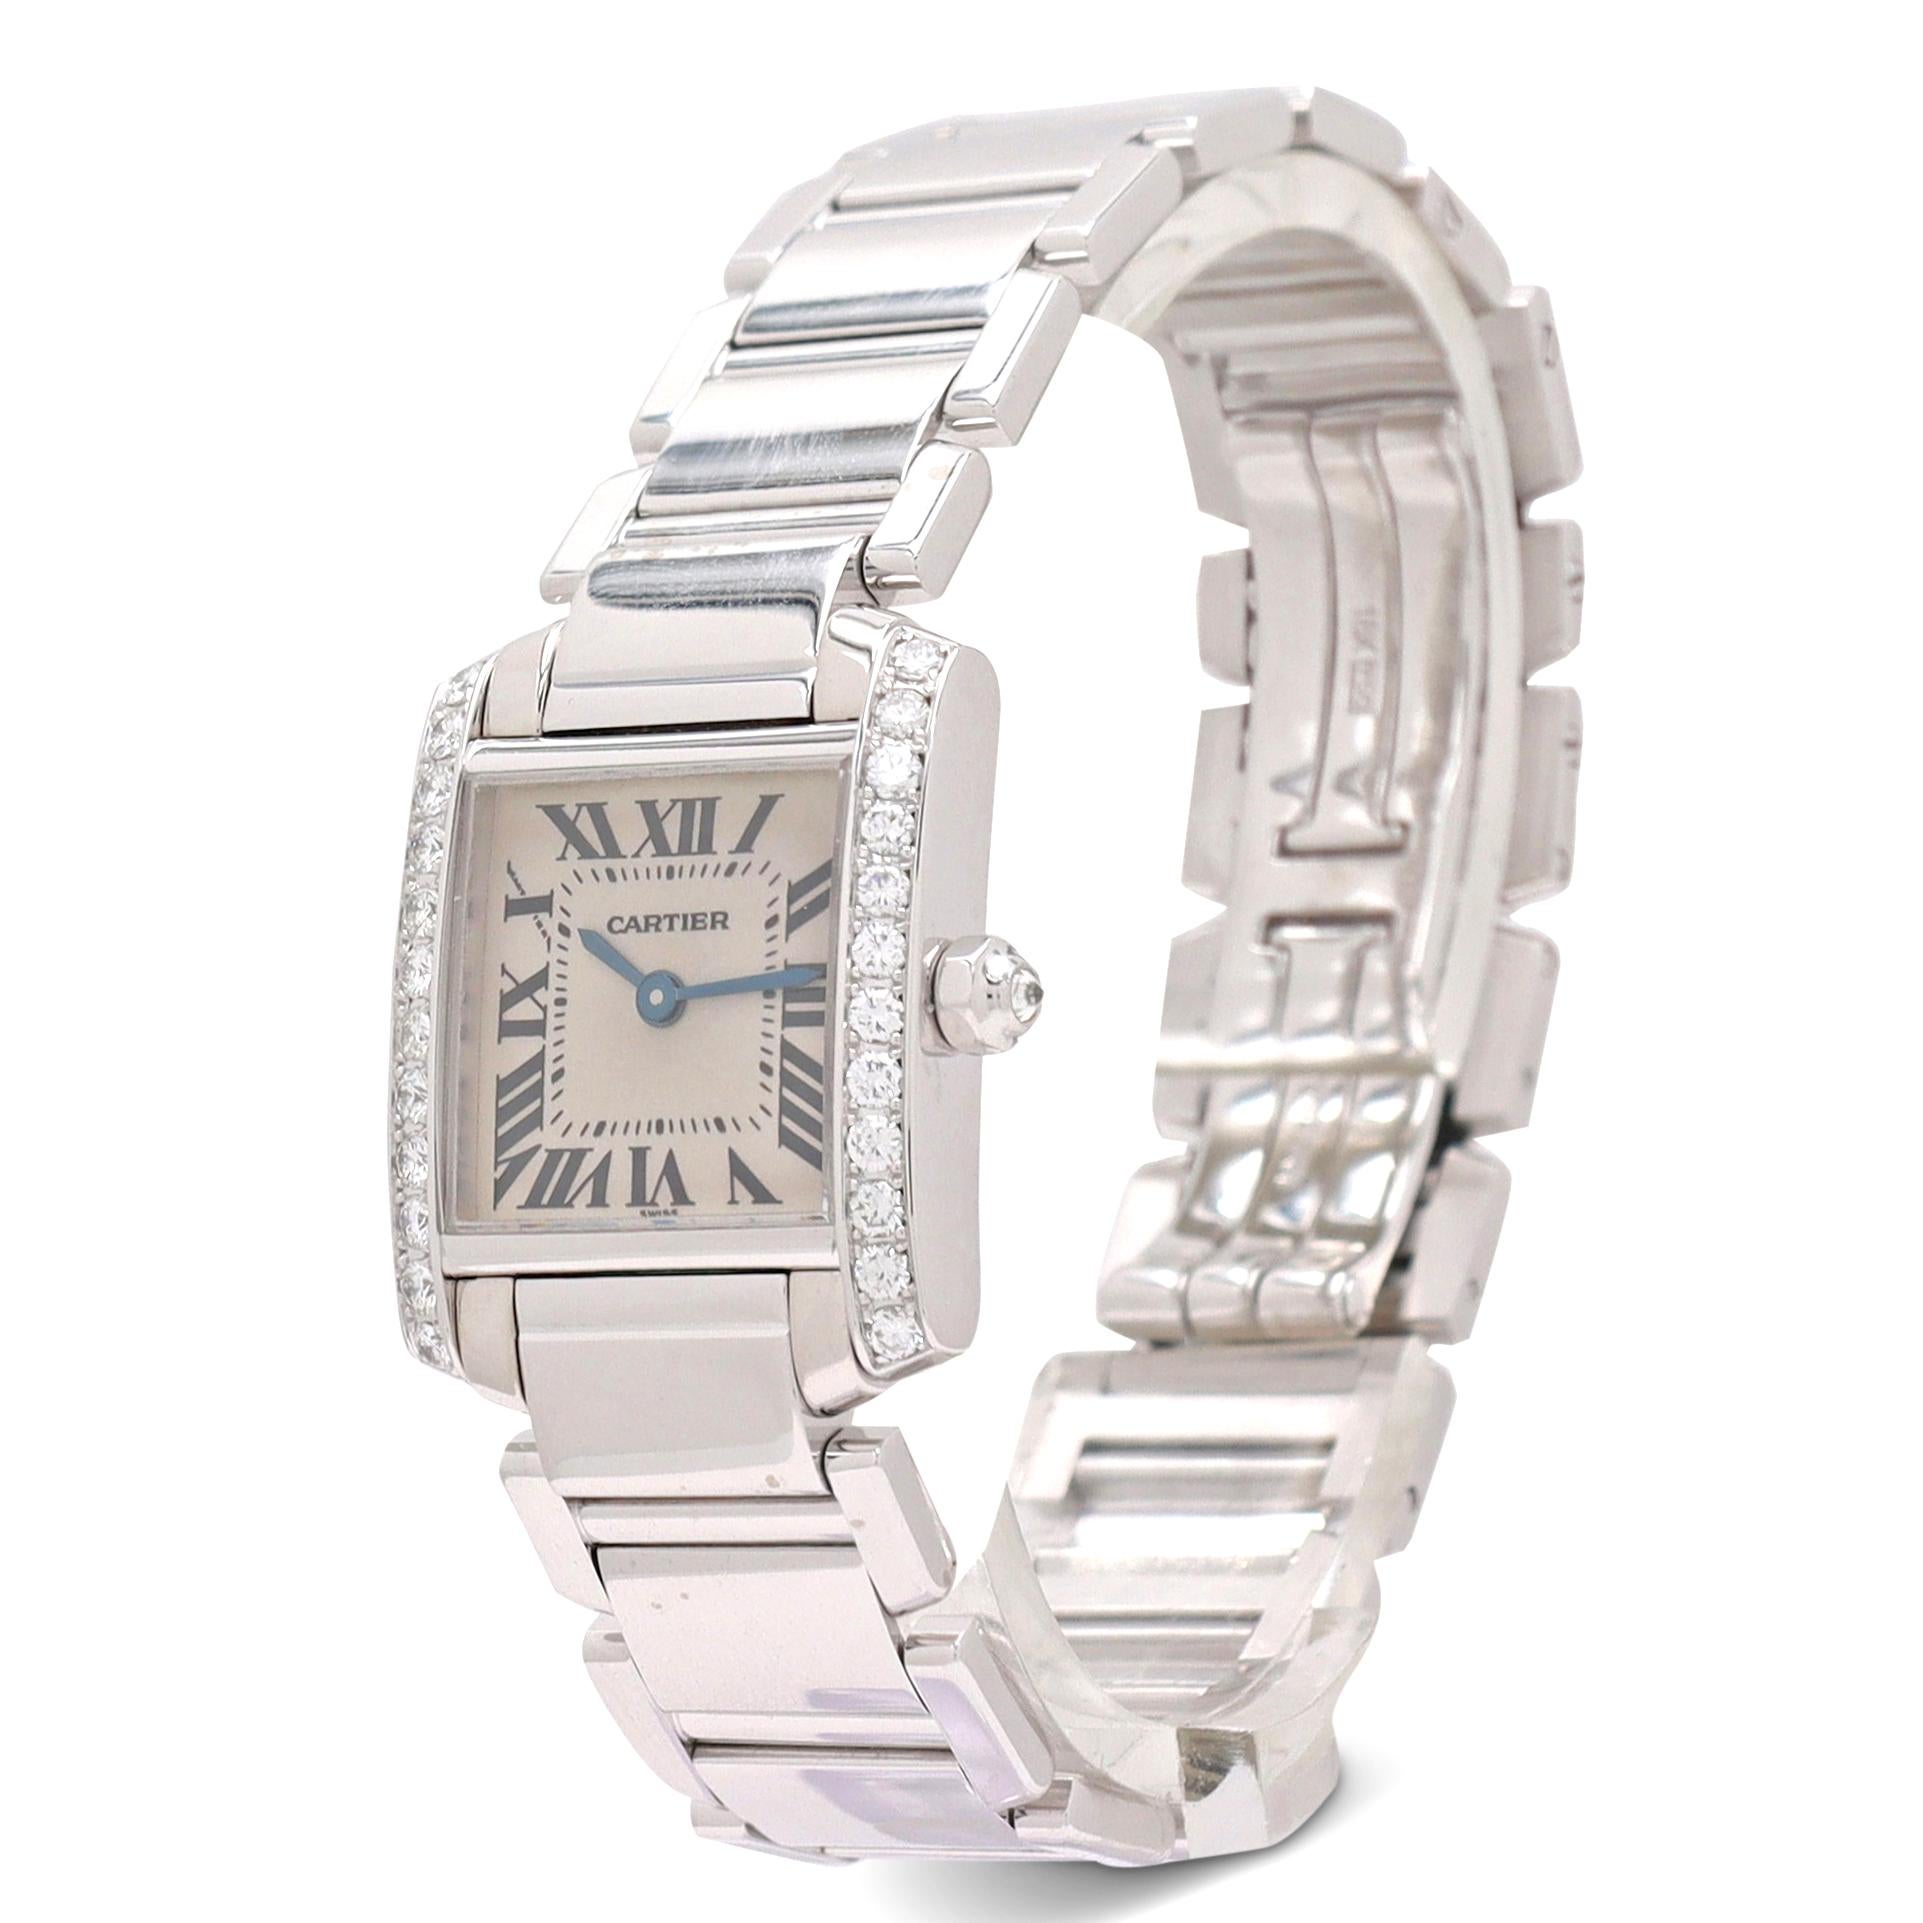 Authentic Cartier 'Tank Française' watch crafted in 18 karat white gold. The rectangular case (20 mm x 25 mm) is set with high-quality round brilliant cut diamonds and the octagonal crown is set with one diamond. Silvered dial with painted black